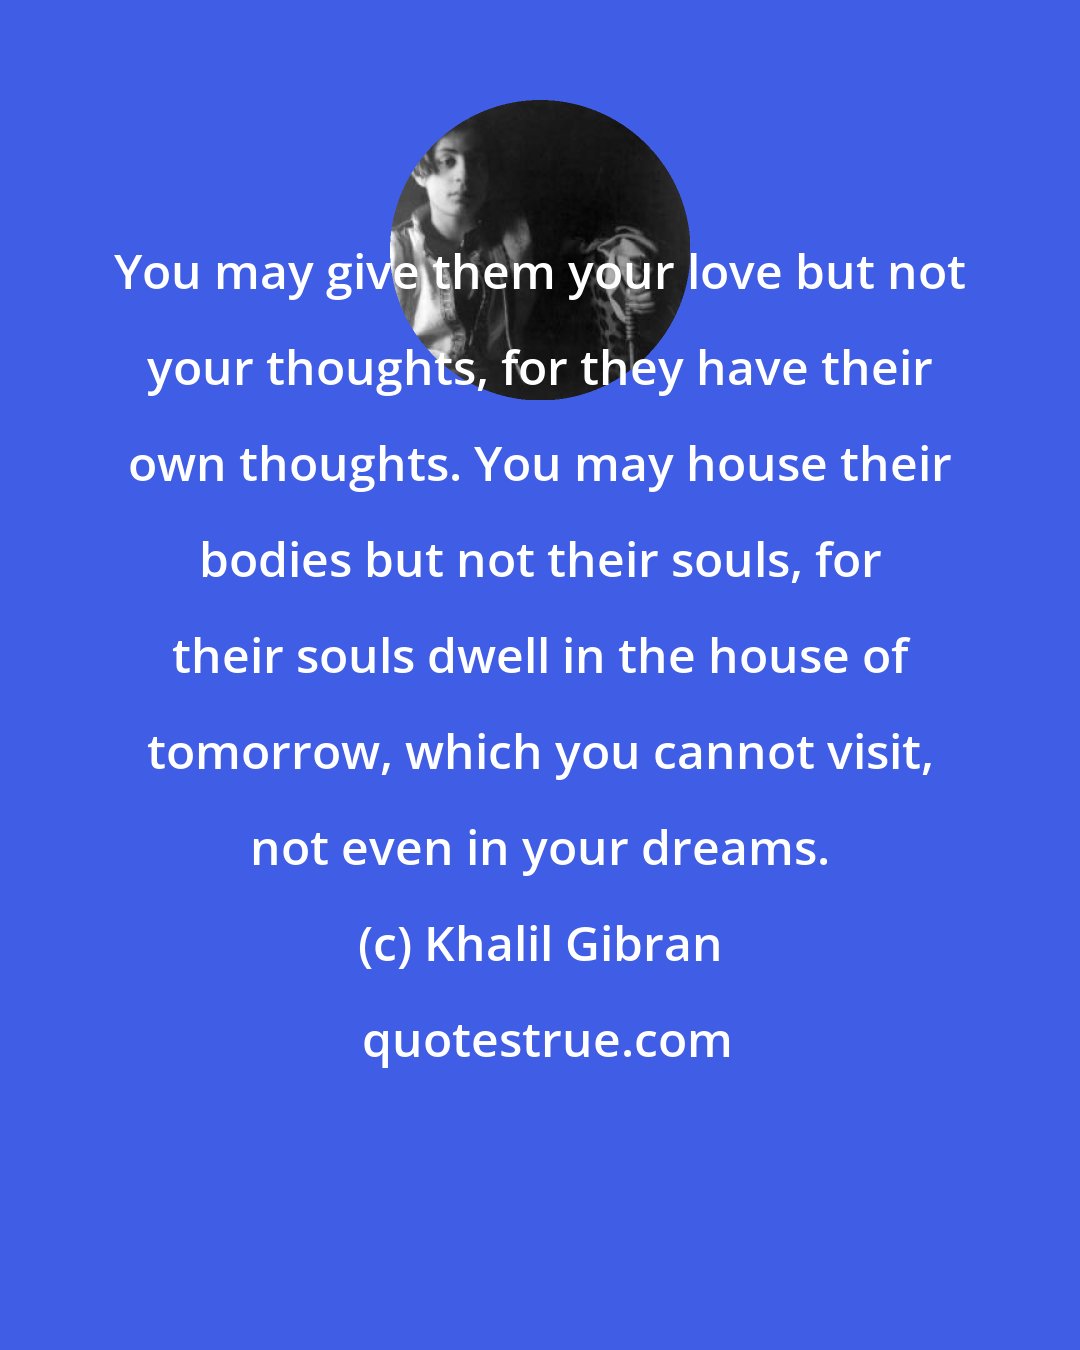 Khalil Gibran: You may give them your love but not your thoughts, for they have their own thoughts. You may house their bodies but not their souls, for their souls dwell in the house of tomorrow, which you cannot visit, not even in your dreams.